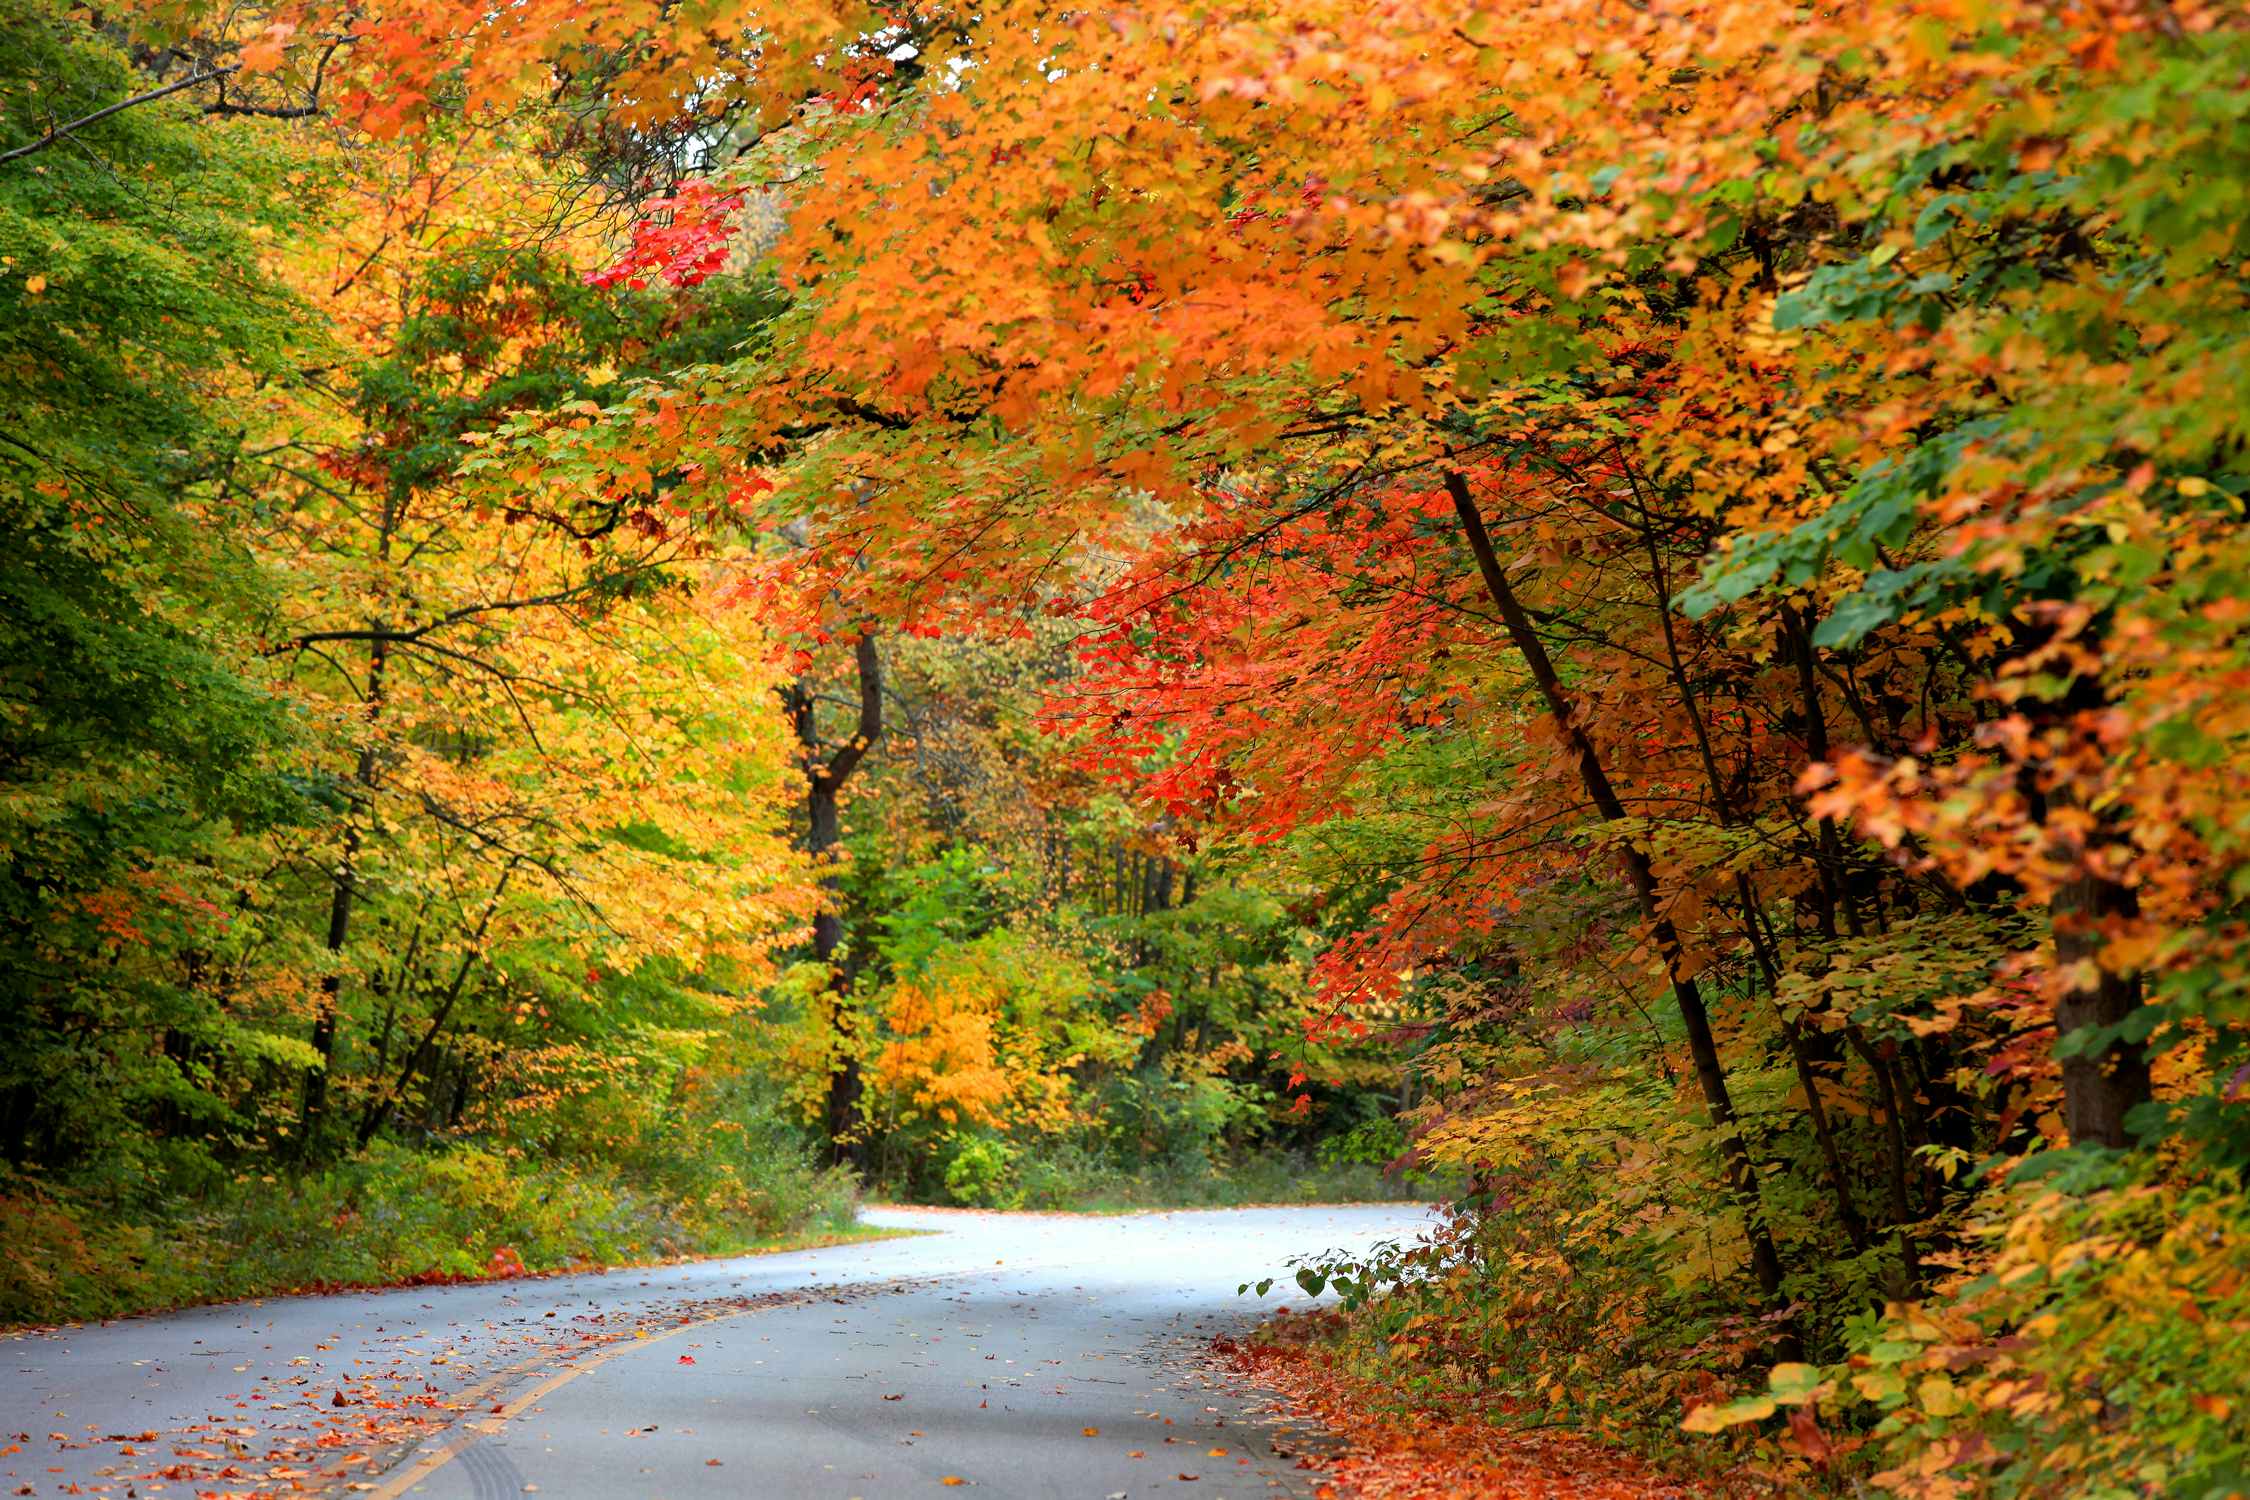 scenic fall drive with colorful turning autumn leaves